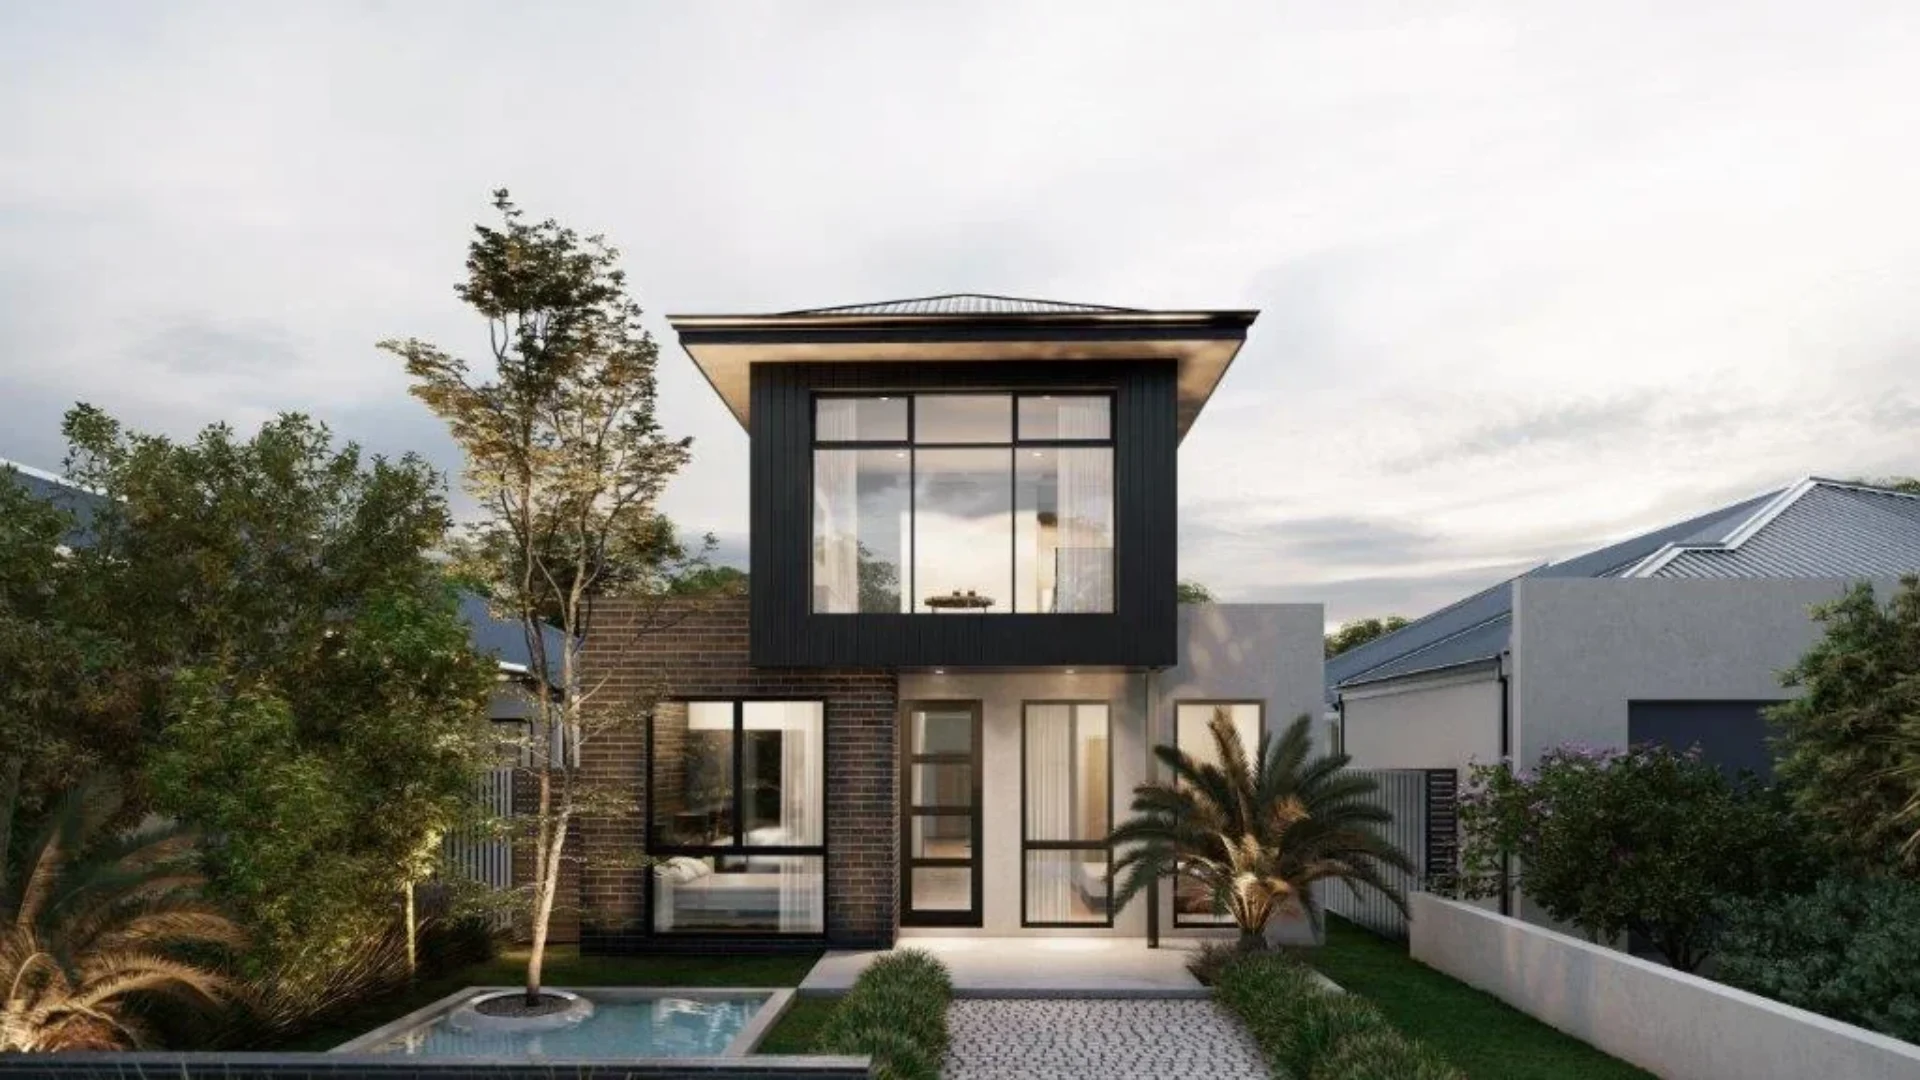 A range of affordable two storey homes in Perth WA designed by home builder Residential Attitudes: Still Disco